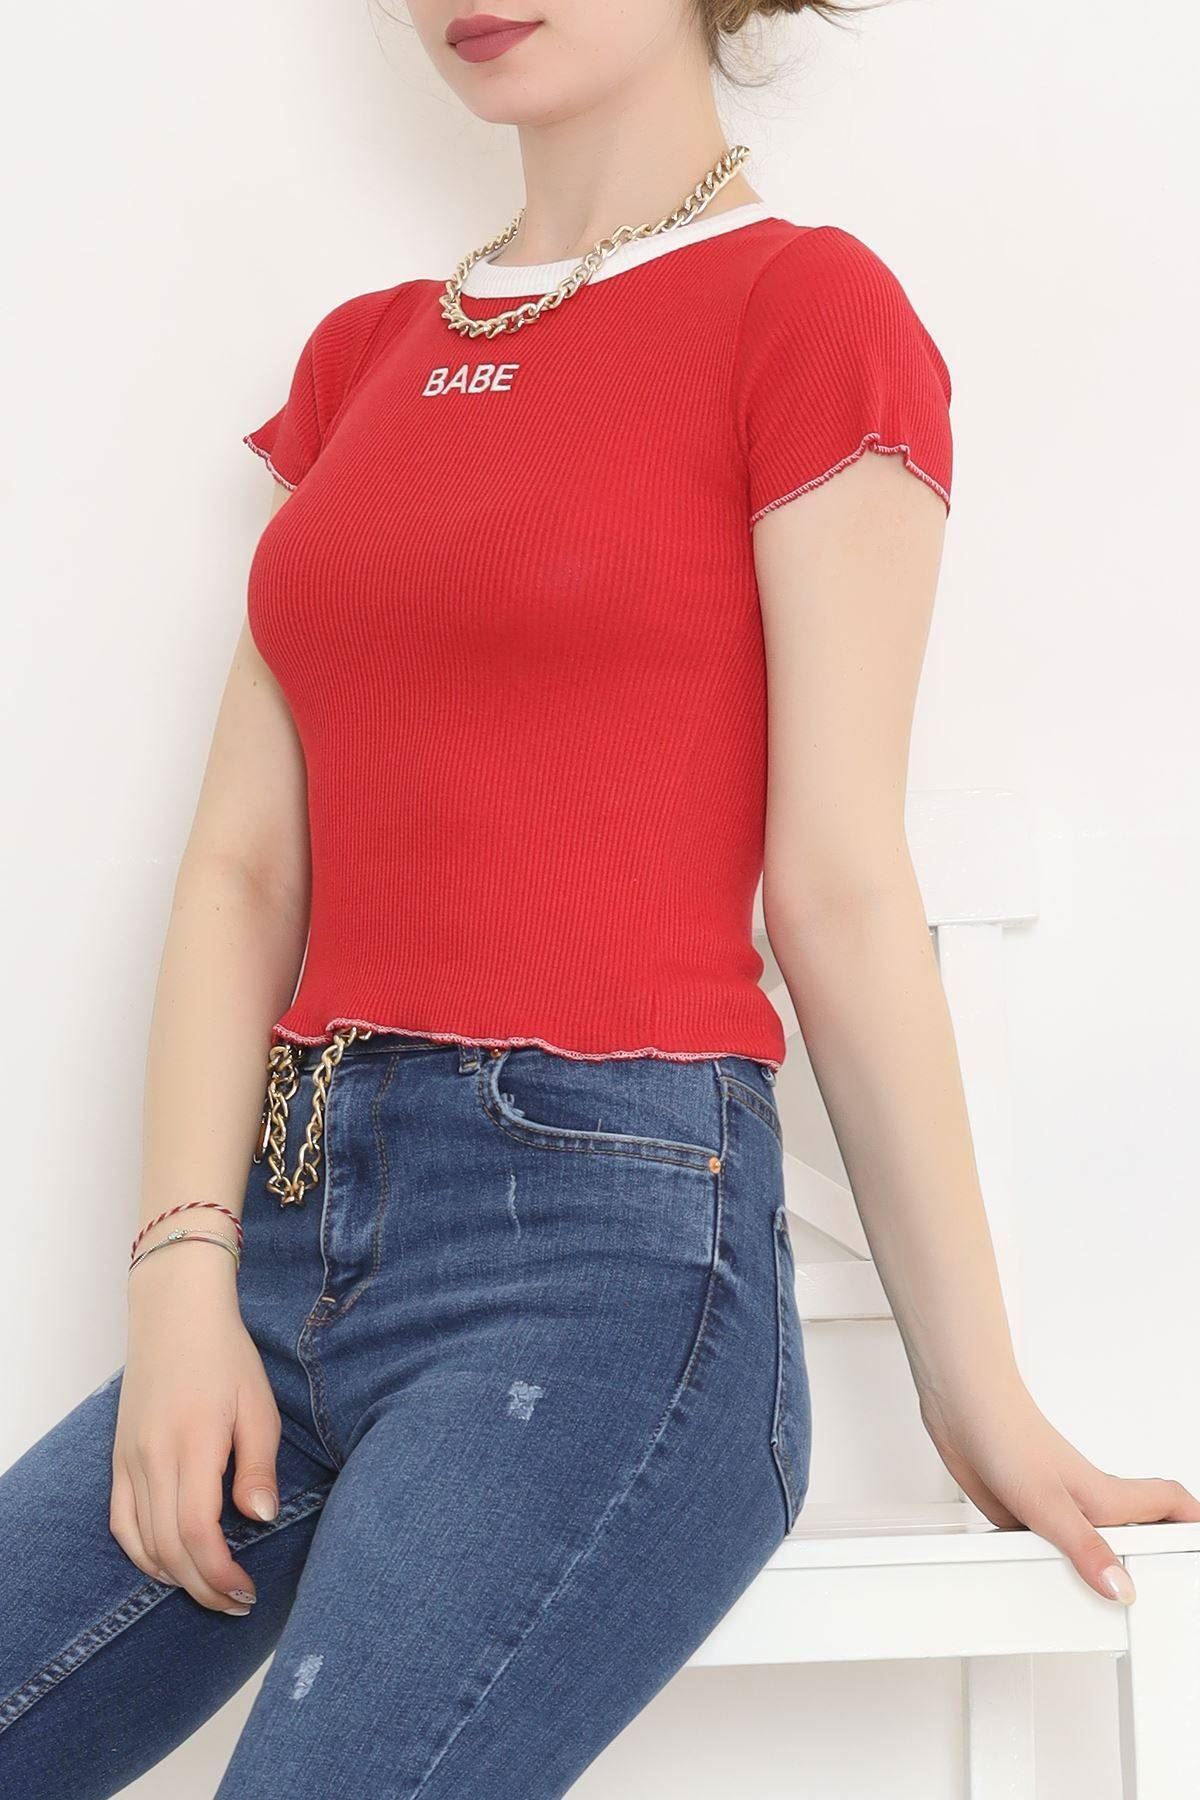 A model wears HAV11376 - Babe Embroidered Blouse Red - 11009.1567., wholesale Blouse of Helin Avşar to display at Lonca